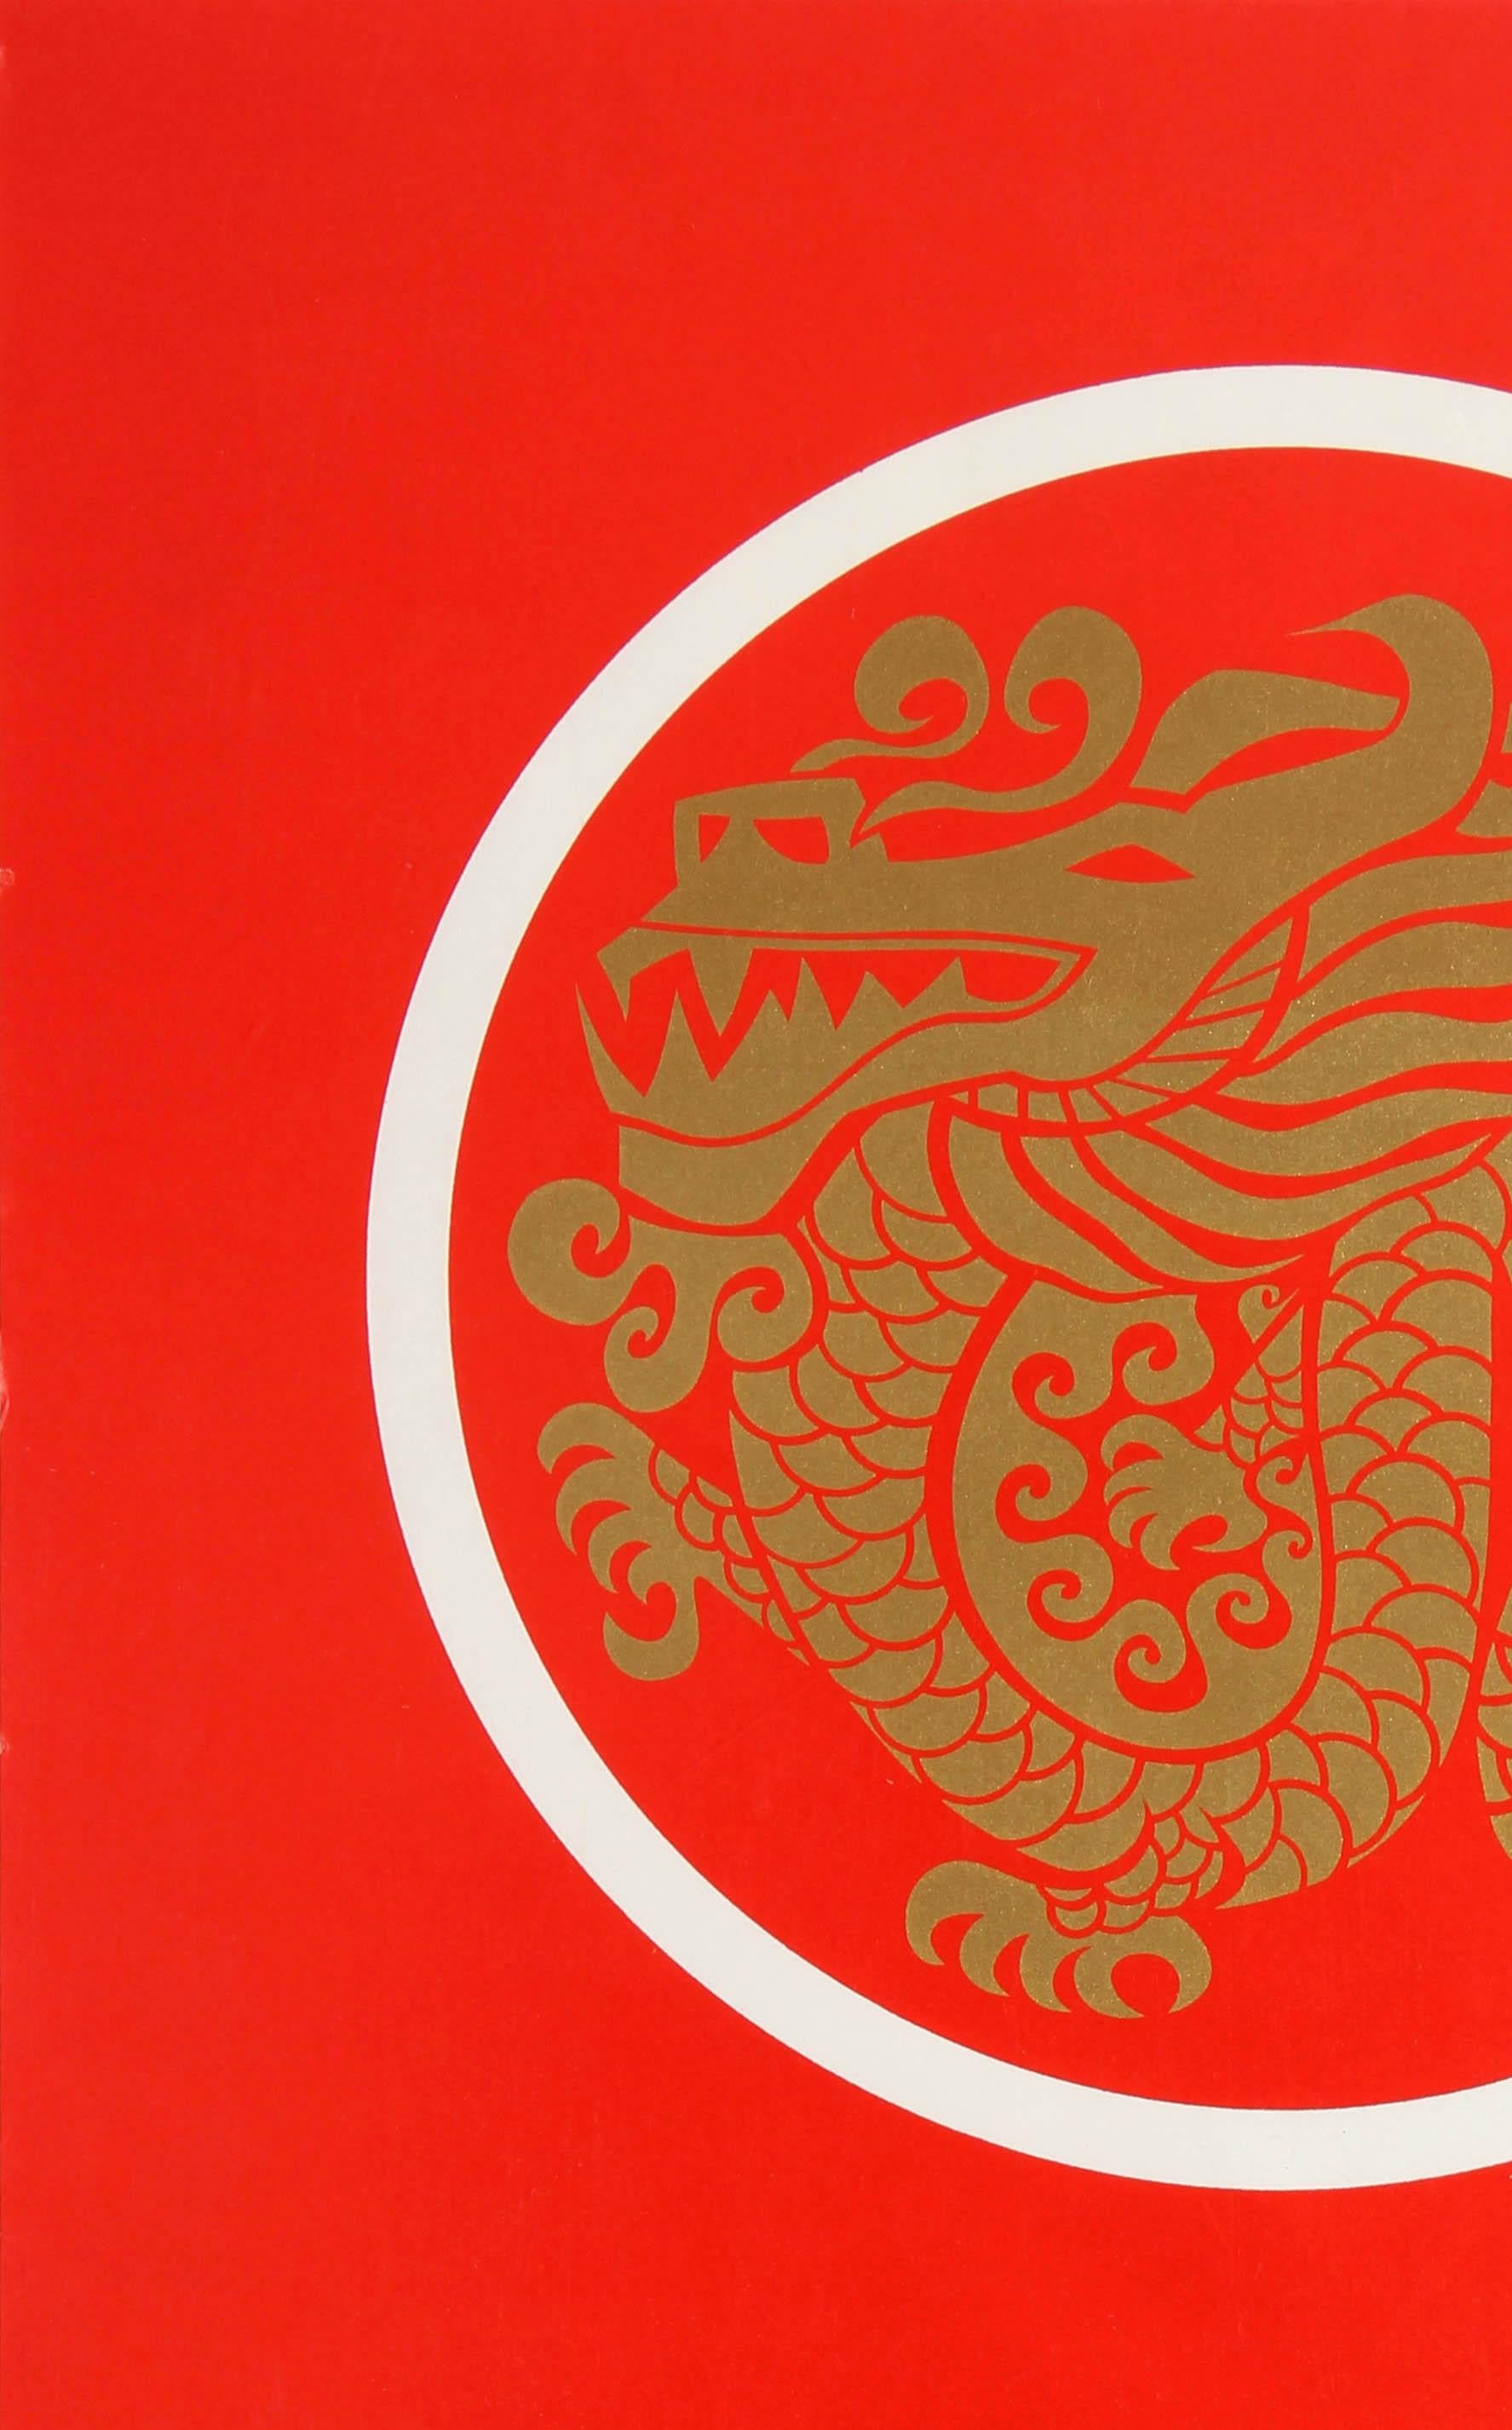 Original vintage travel poster advertising Hong Kong by BOAC featuring a stunning illustration by Arnold Fujita (1926-2012) of a golden Chinese dragon in a white circle against a bold red background, the text and speedbird logo below. (The British